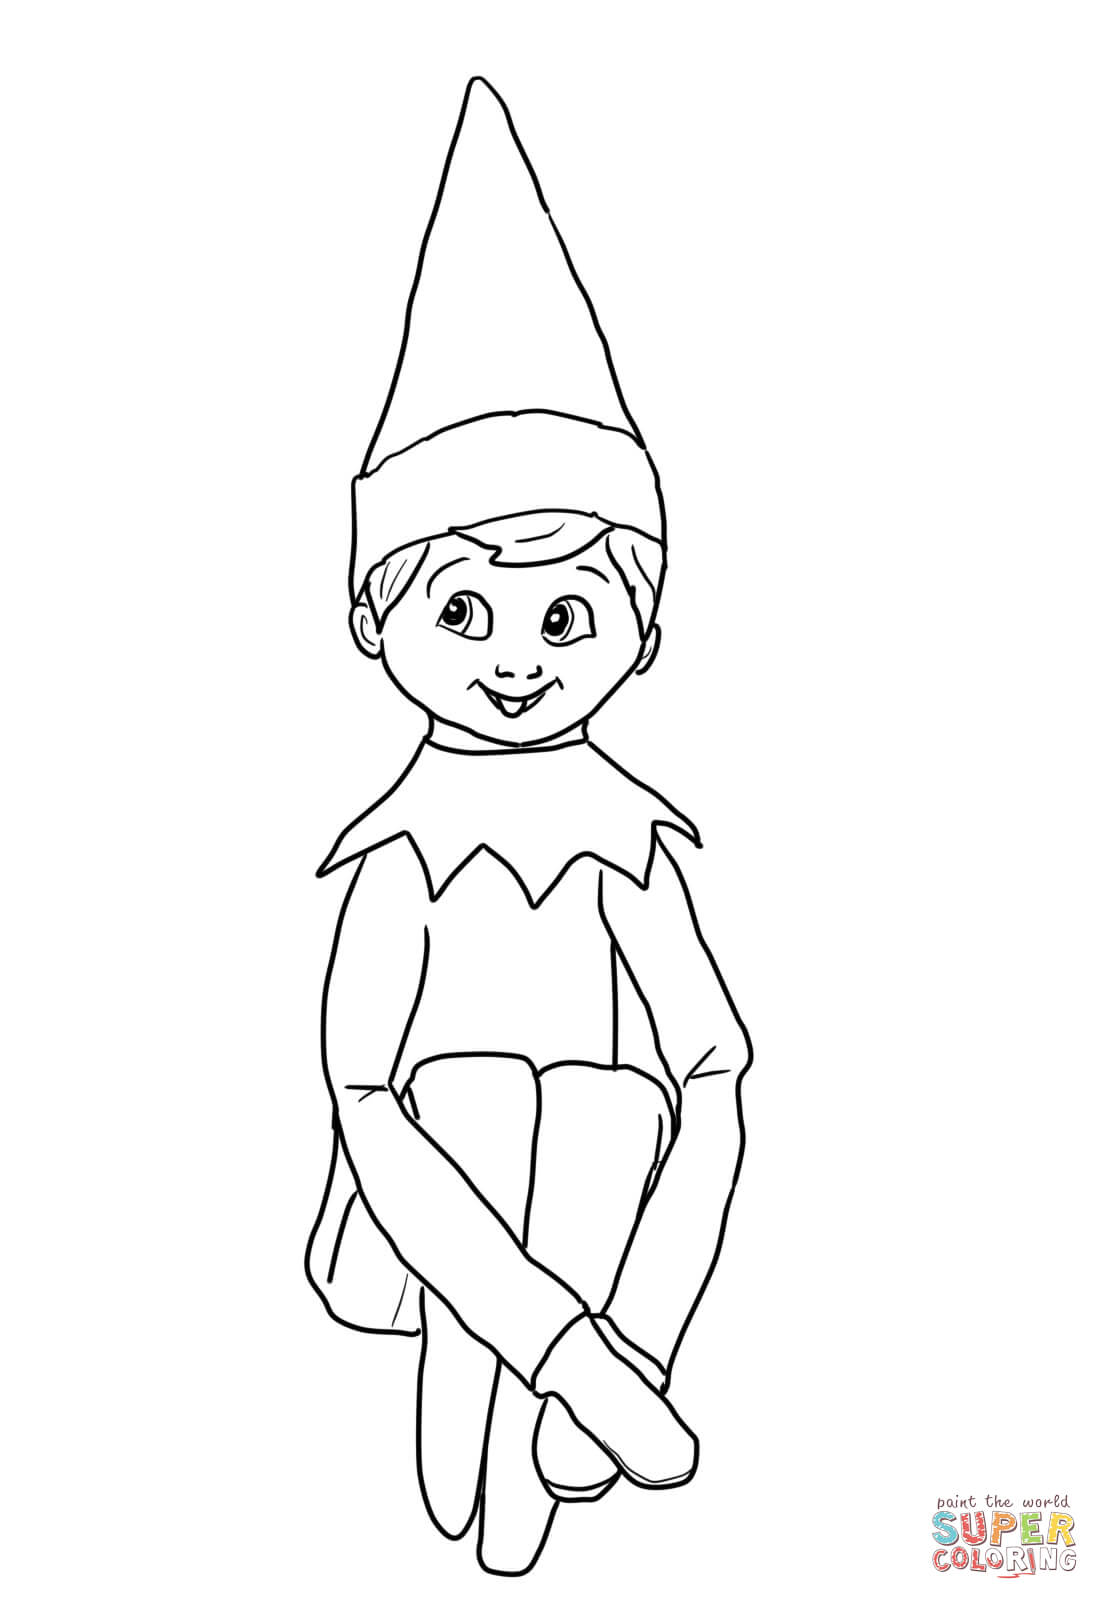 pics-of-elf-on-shelf-printable-coloring-page-coloring-home